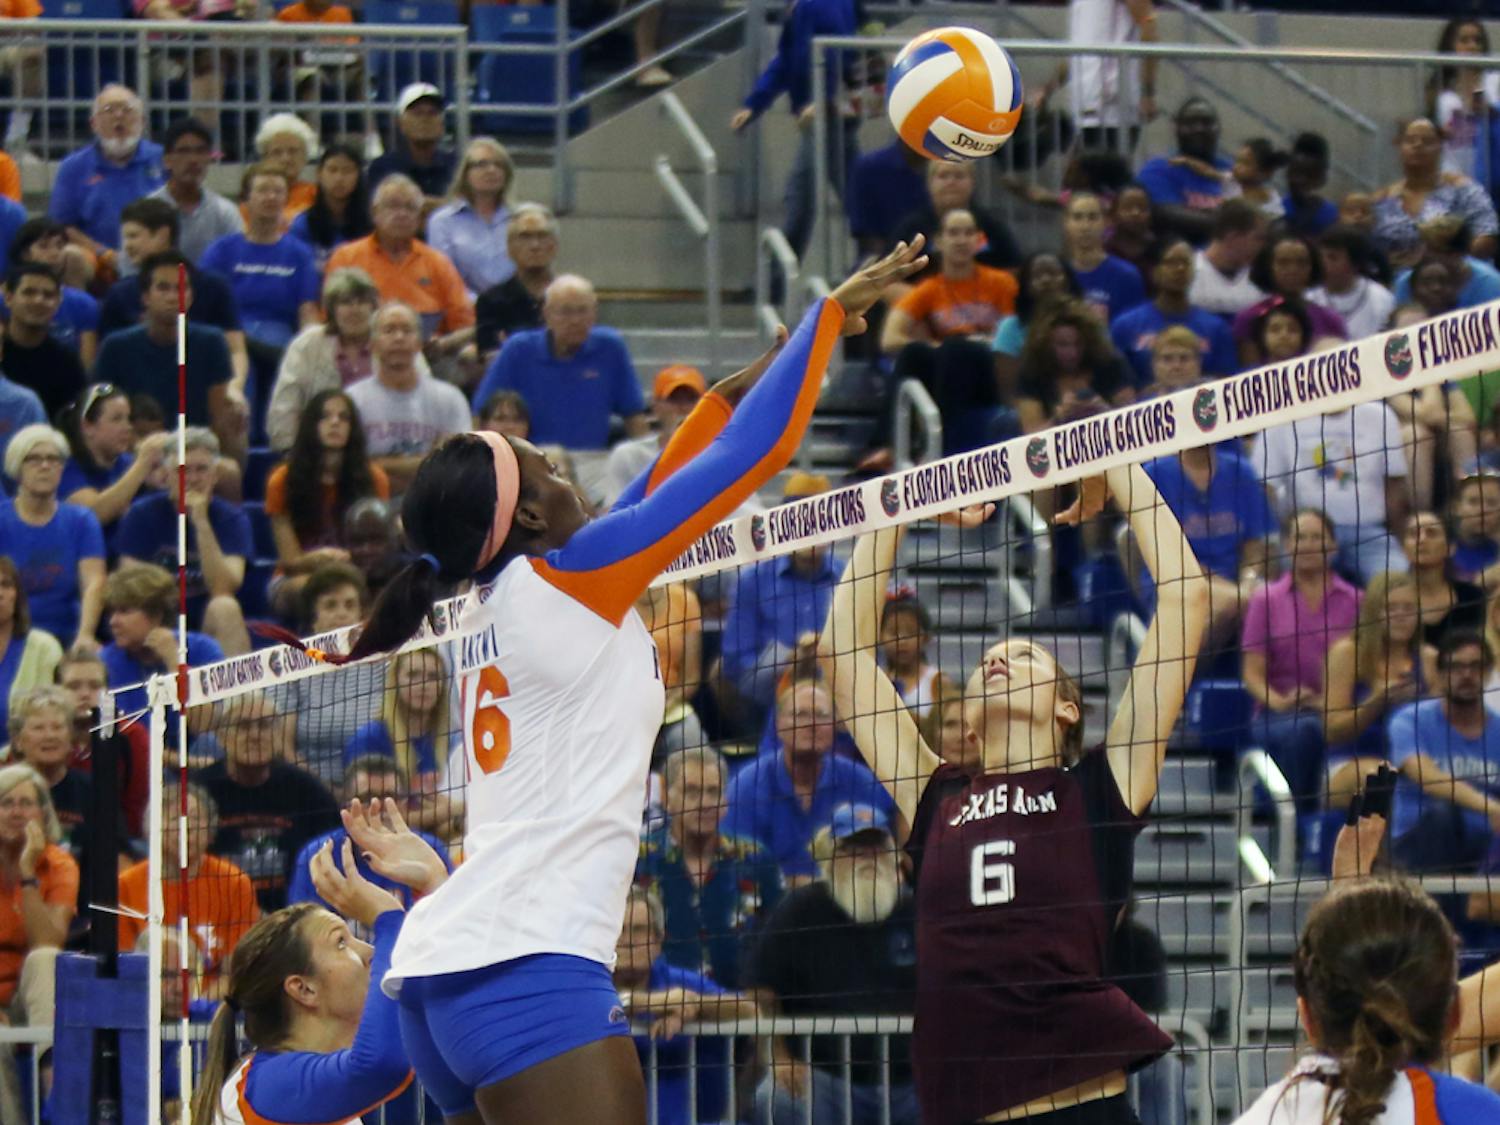 Redshirt sophomore middle blocker Simone Antwi (16) blocks the ball during Florida’s 3-0 victory against Texas A&amp;M on Oct. 4 in the O’Connell Center.